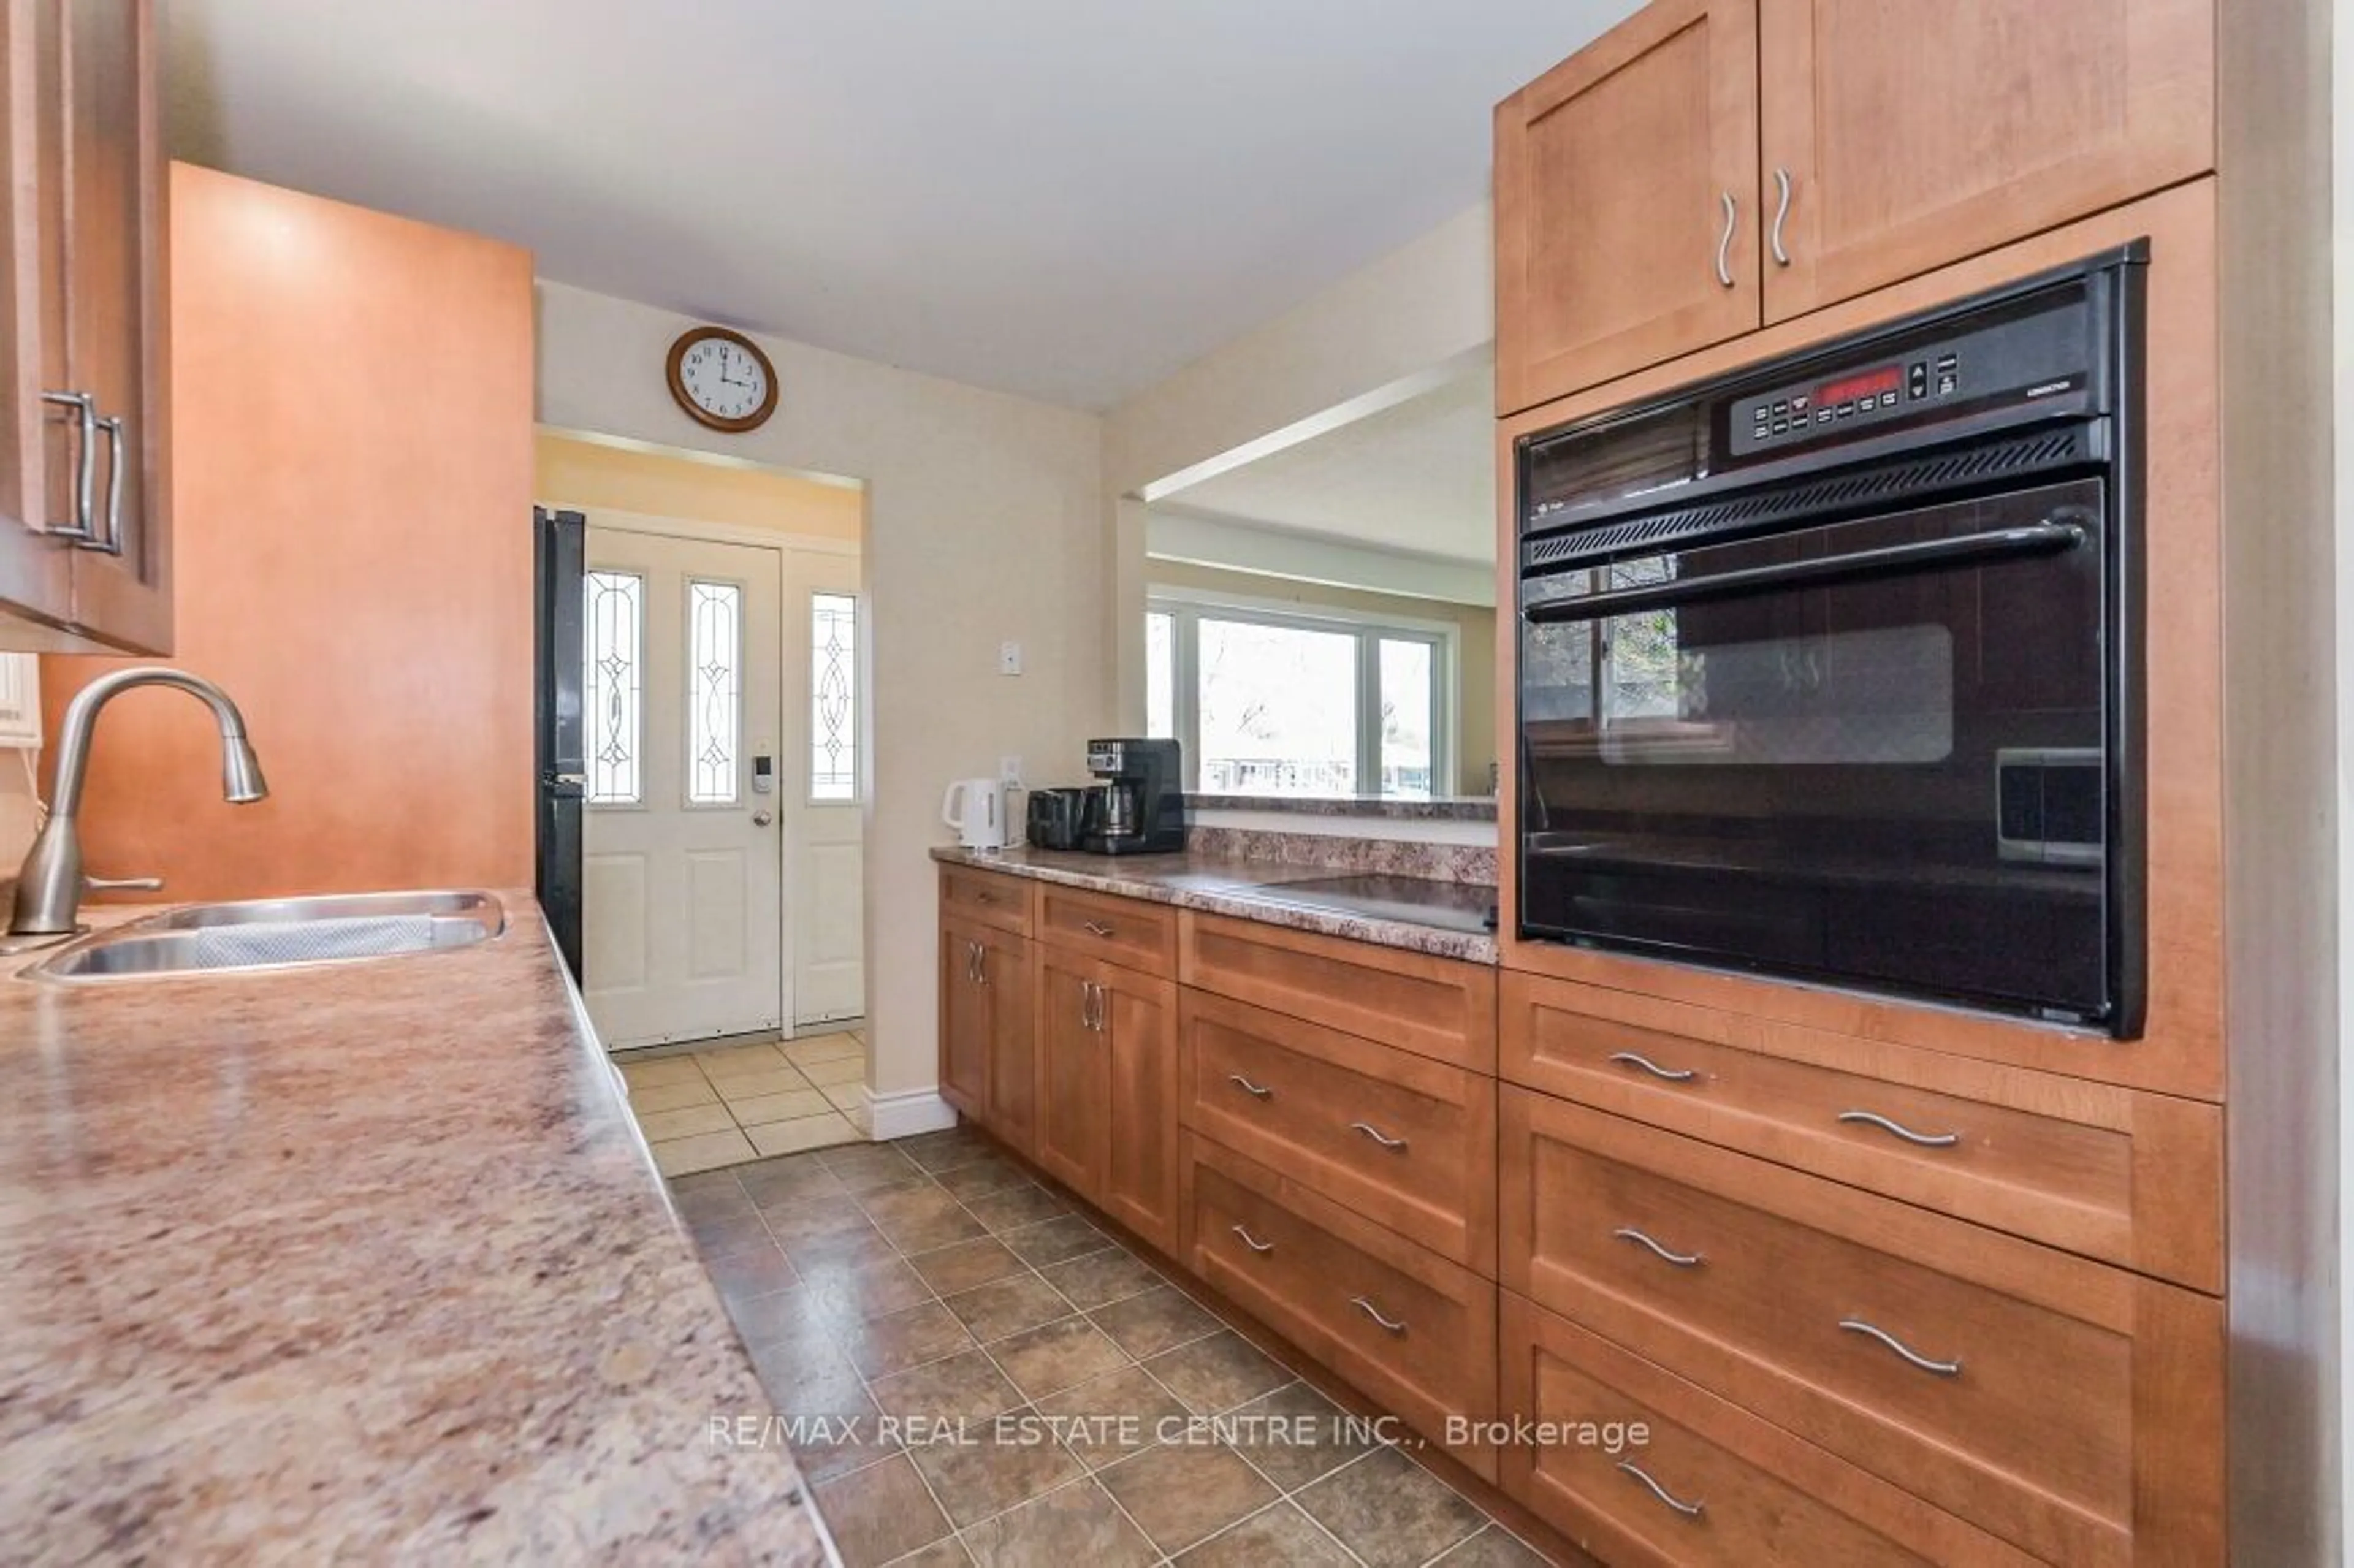 Standard kitchen for 62 Lawrence Ave, Orangeville Ontario L9W 1S7